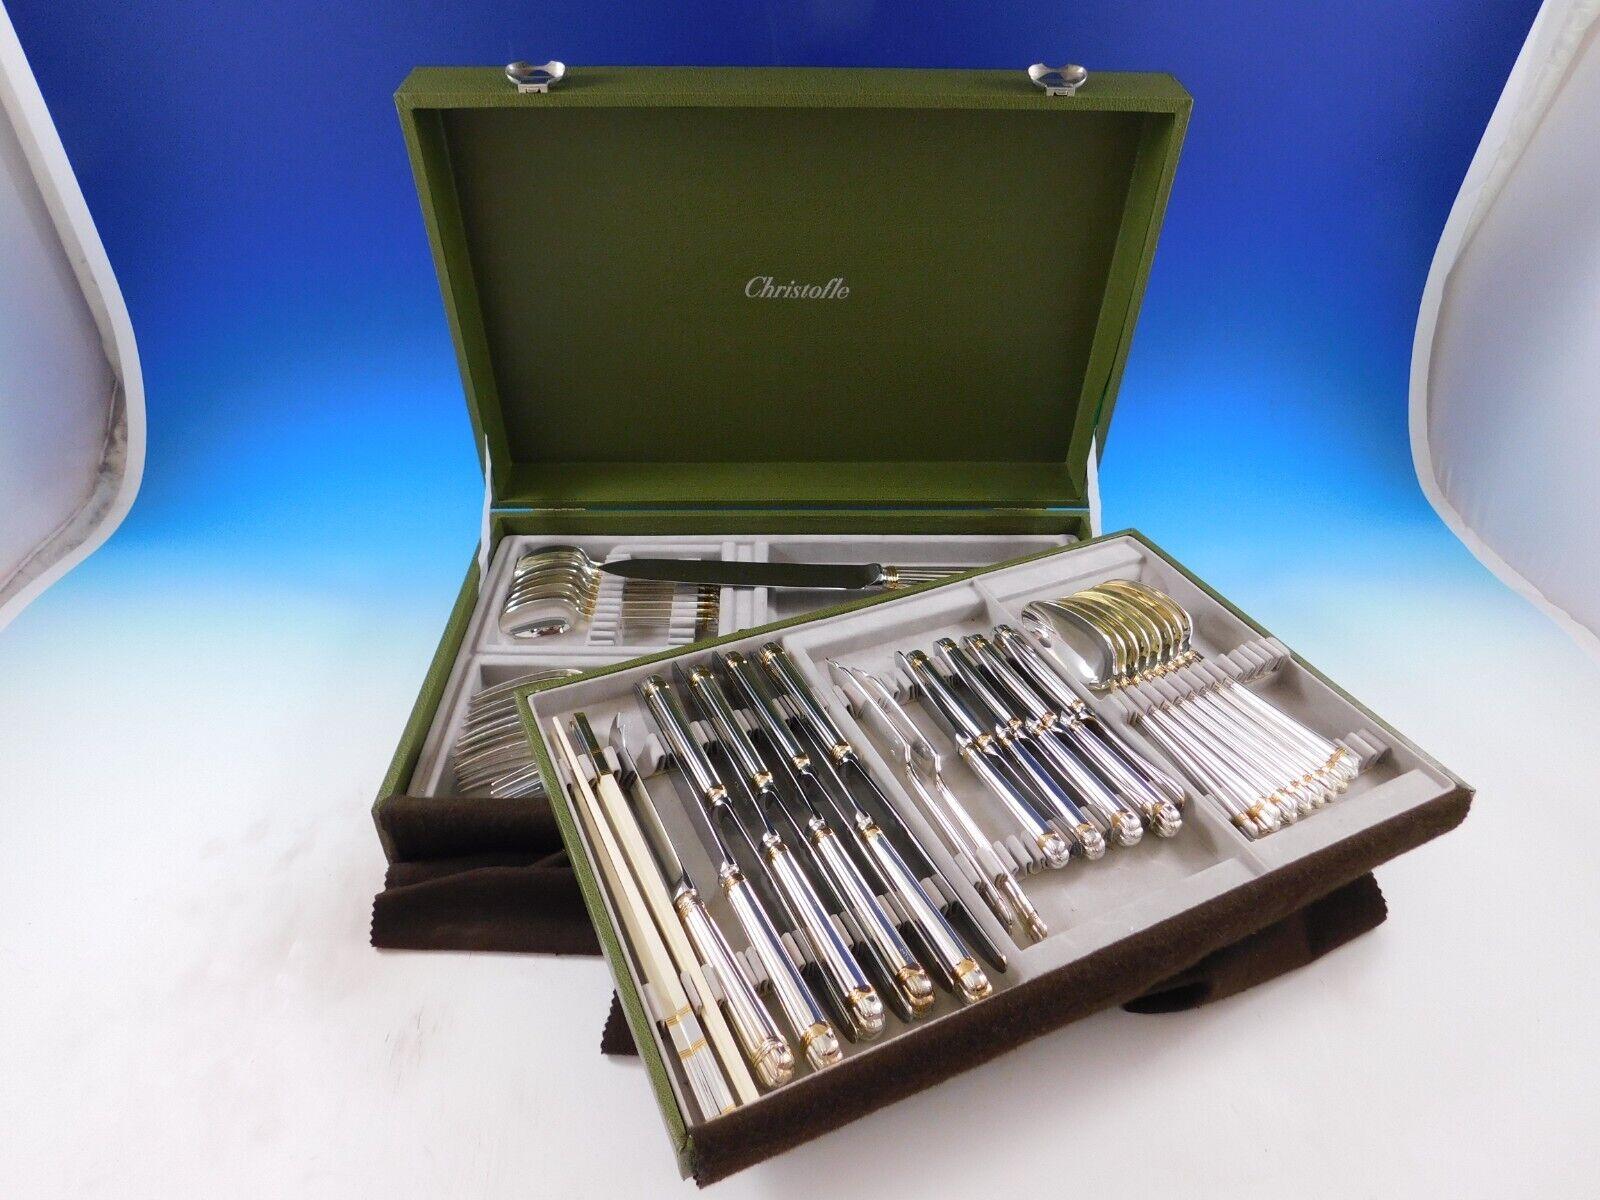 Dinner size Aria gold by Christofle France silverplate flatware set - 64 pieces. This set includes:

8 dinner size knives, 9 5/8